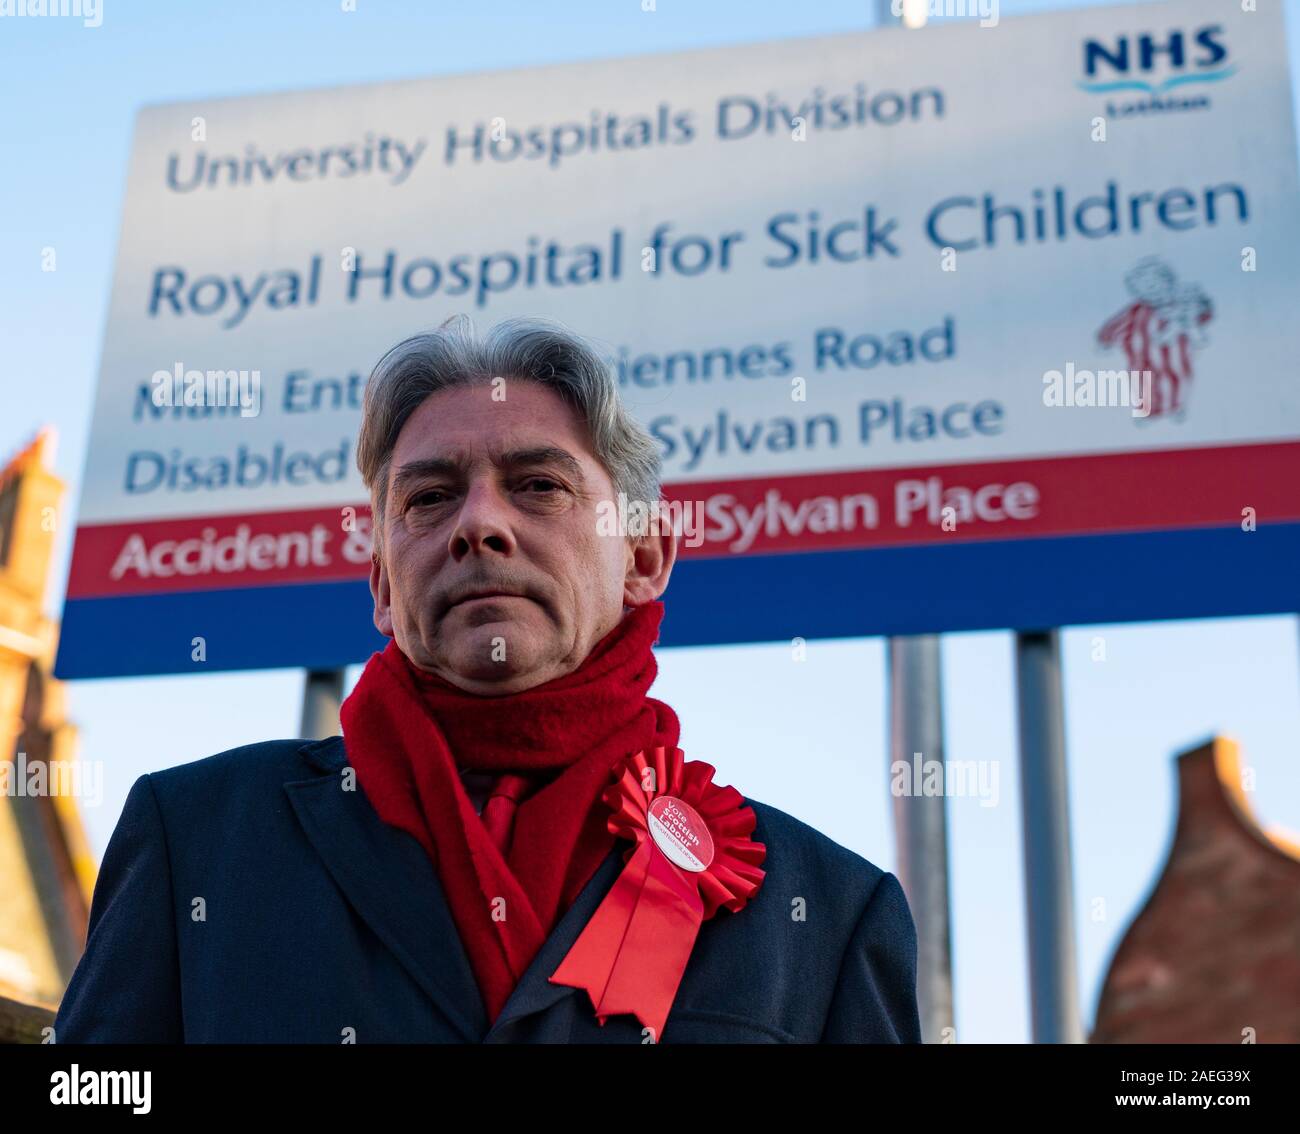 Edinburgh, Scotland, UK. 9th Dec, 2019. Scottish Labour leader Richard Leonard outside Edinburgh's Royal Hospital for Sick Children to highlight the risks to the NHS and outline Labour's plans to invest in and revive the health service. Credit: Iain Masterton/Alamy Live News Stock Photo